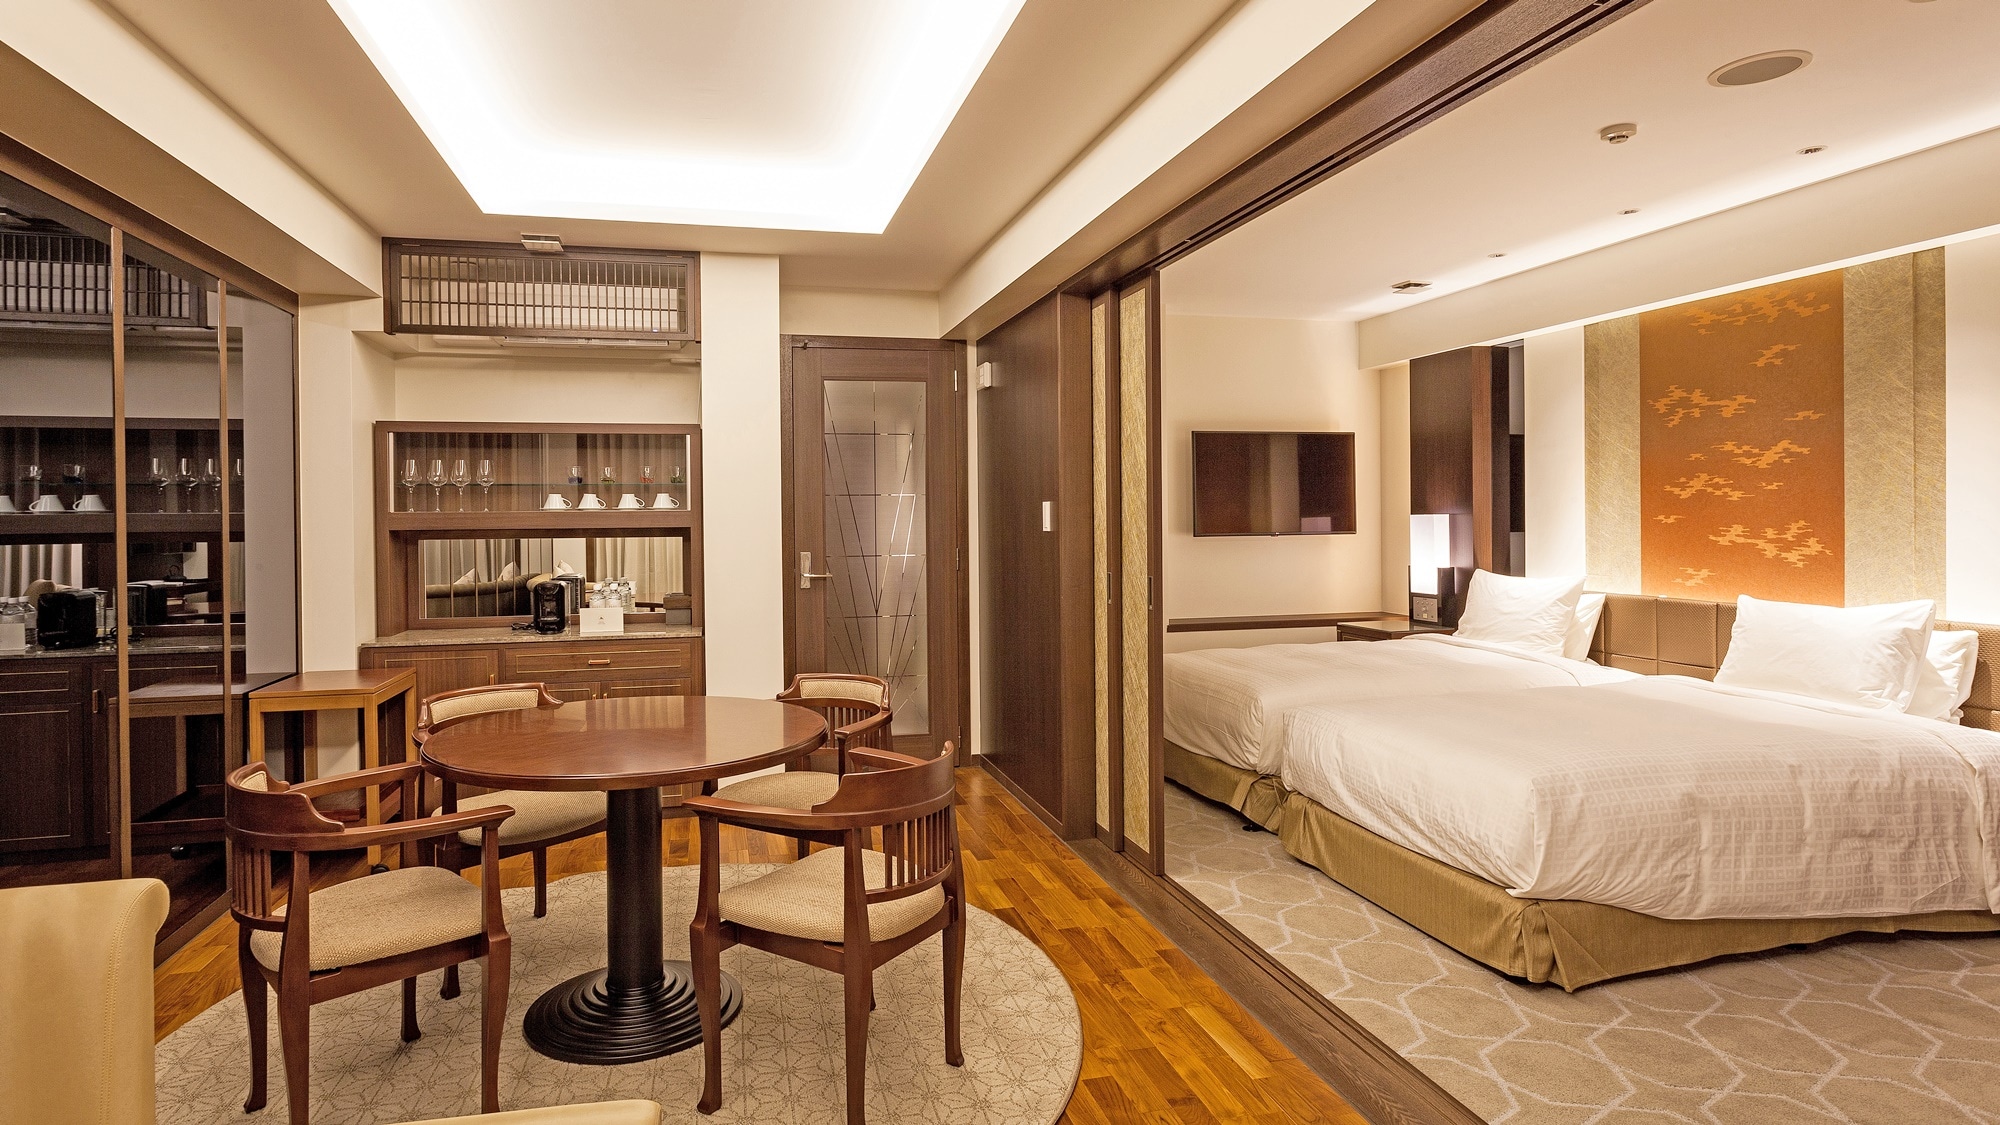  [EXES Premier Grand Suite] 7 rooms / 68 square meters, 1 room each on the 3rd to 9th floors